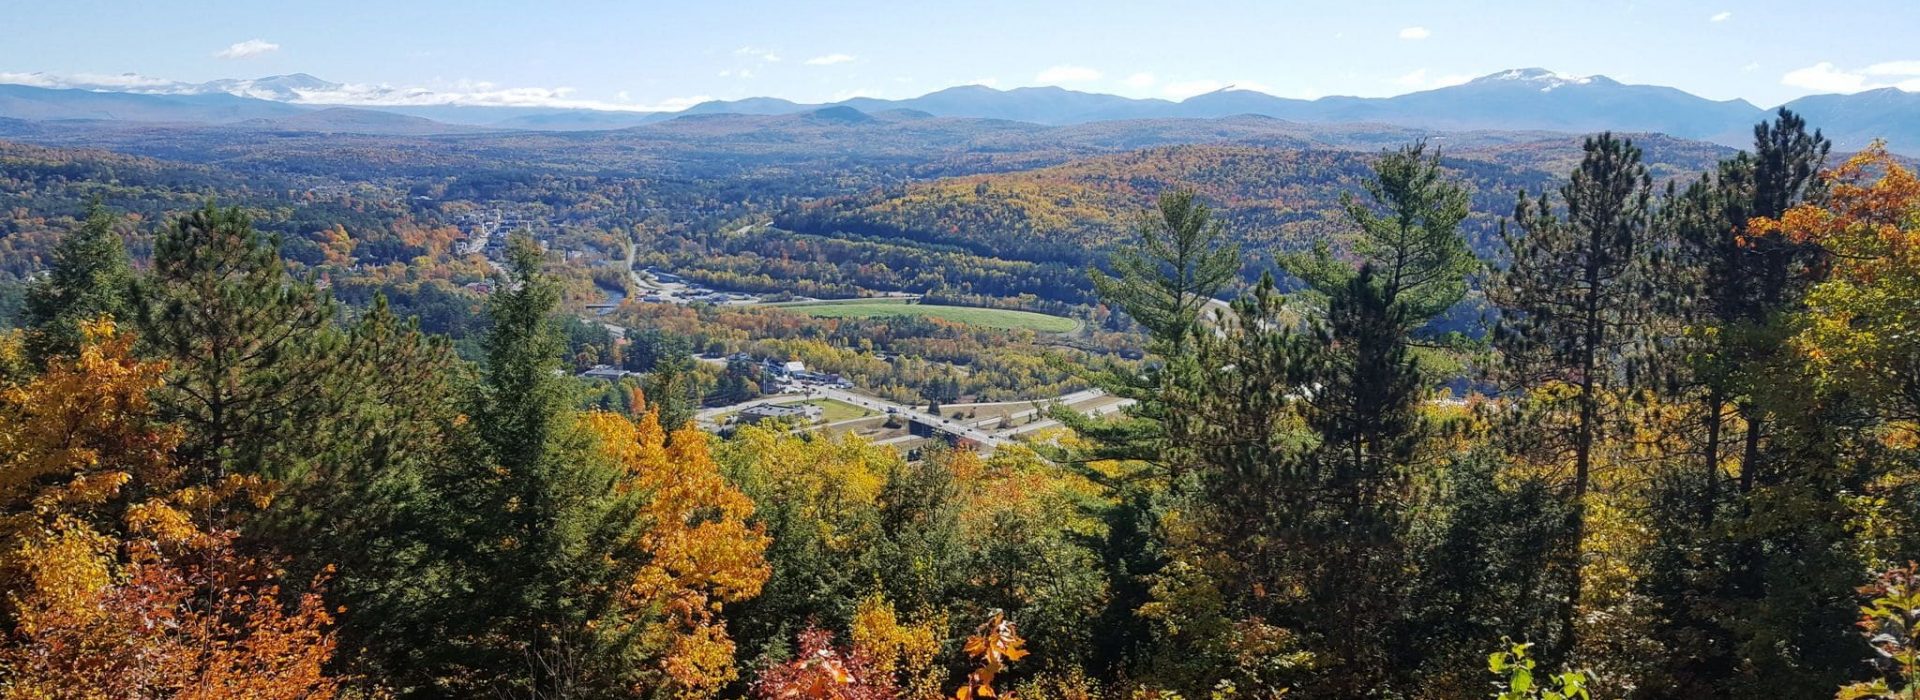 Mountain view and wooded terrain at the Kilburn Crags hiking Trails in Littleton New Hampshire